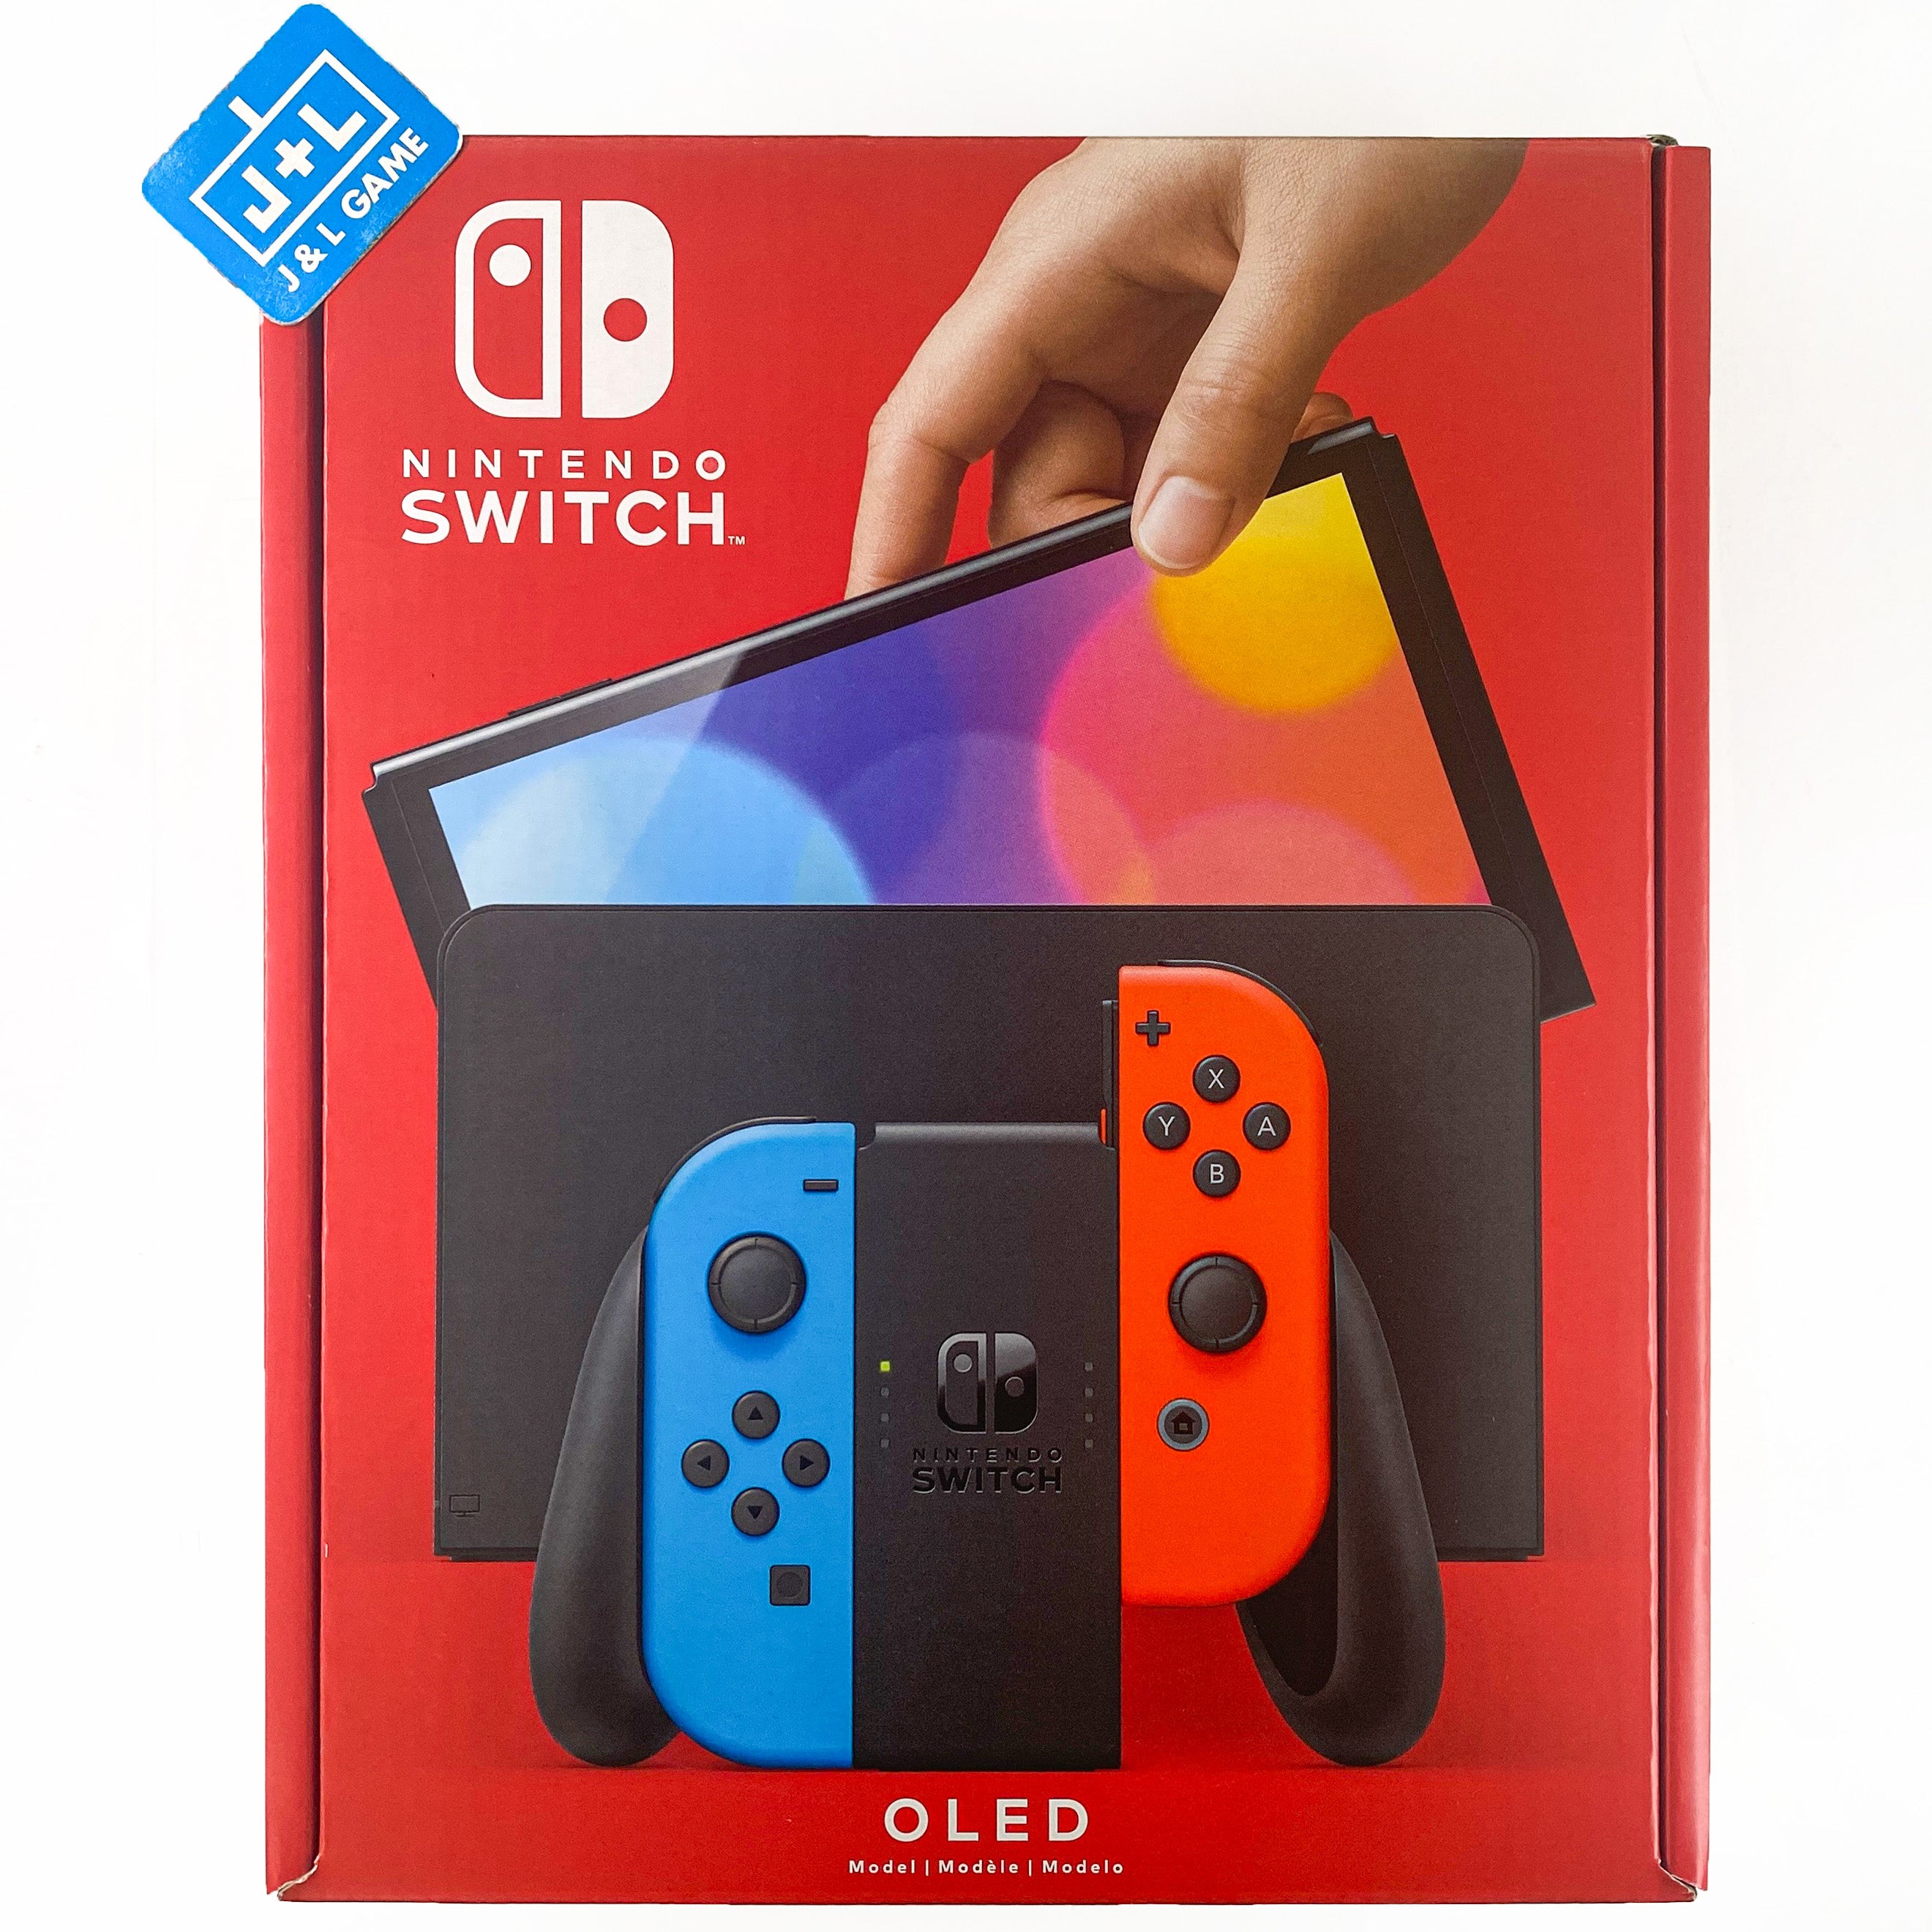 Nintendo Switch OLED Model (Neon Red & Neon Blue Set) - (NSW) Nintendo Switch CONSOLE Nintendo   